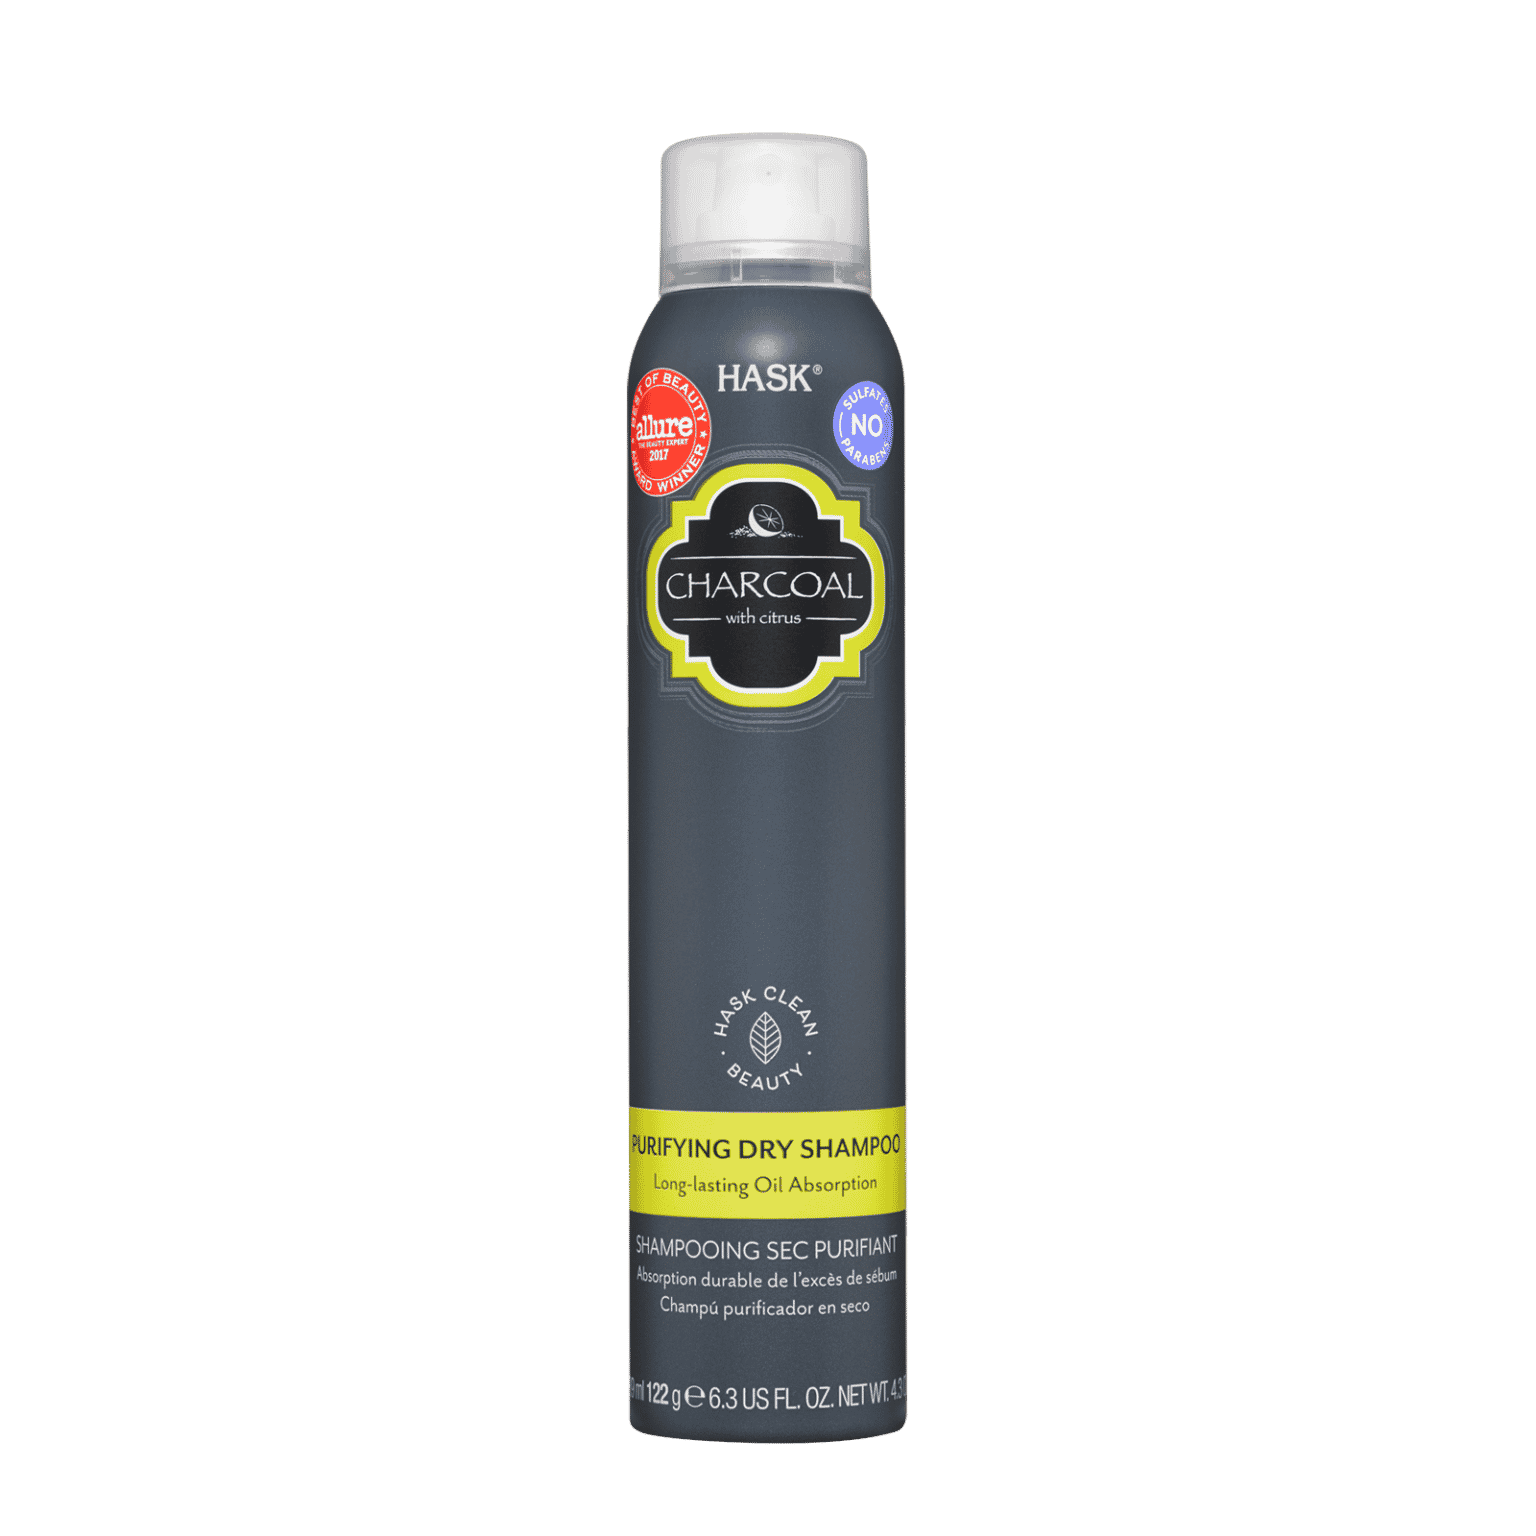 HASK CHARCOAL with citrus – Purifying Dry Shampoo (Shampooing Sec purifiant) 122 g